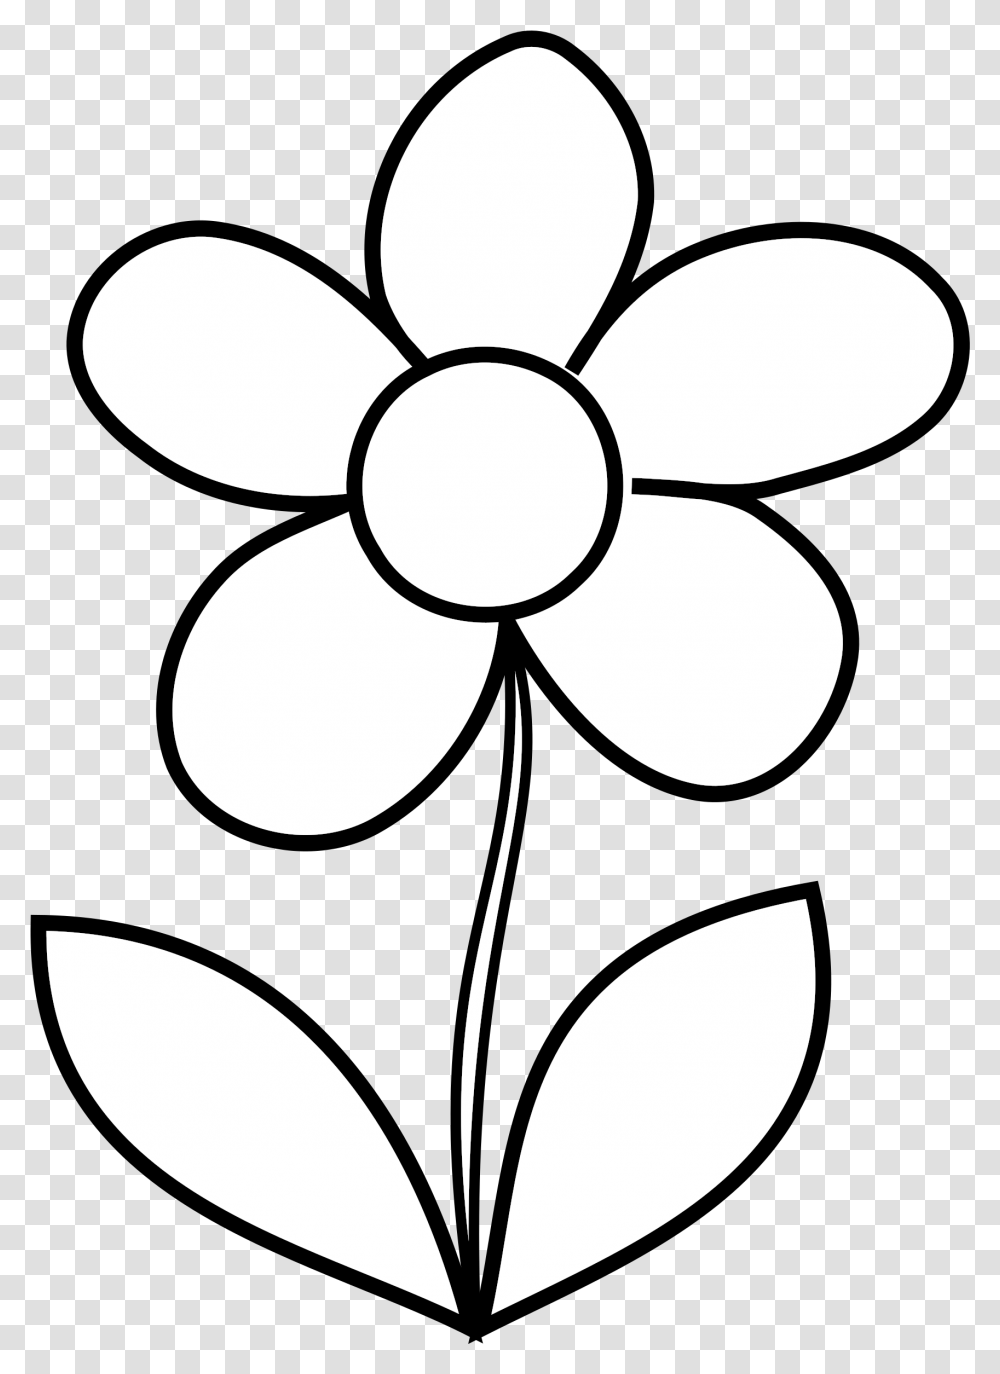 Simple Flower Bw By Coloring Pictures Of Flowers, Pattern, Lamp, Stencil, Symbol Transparent Png